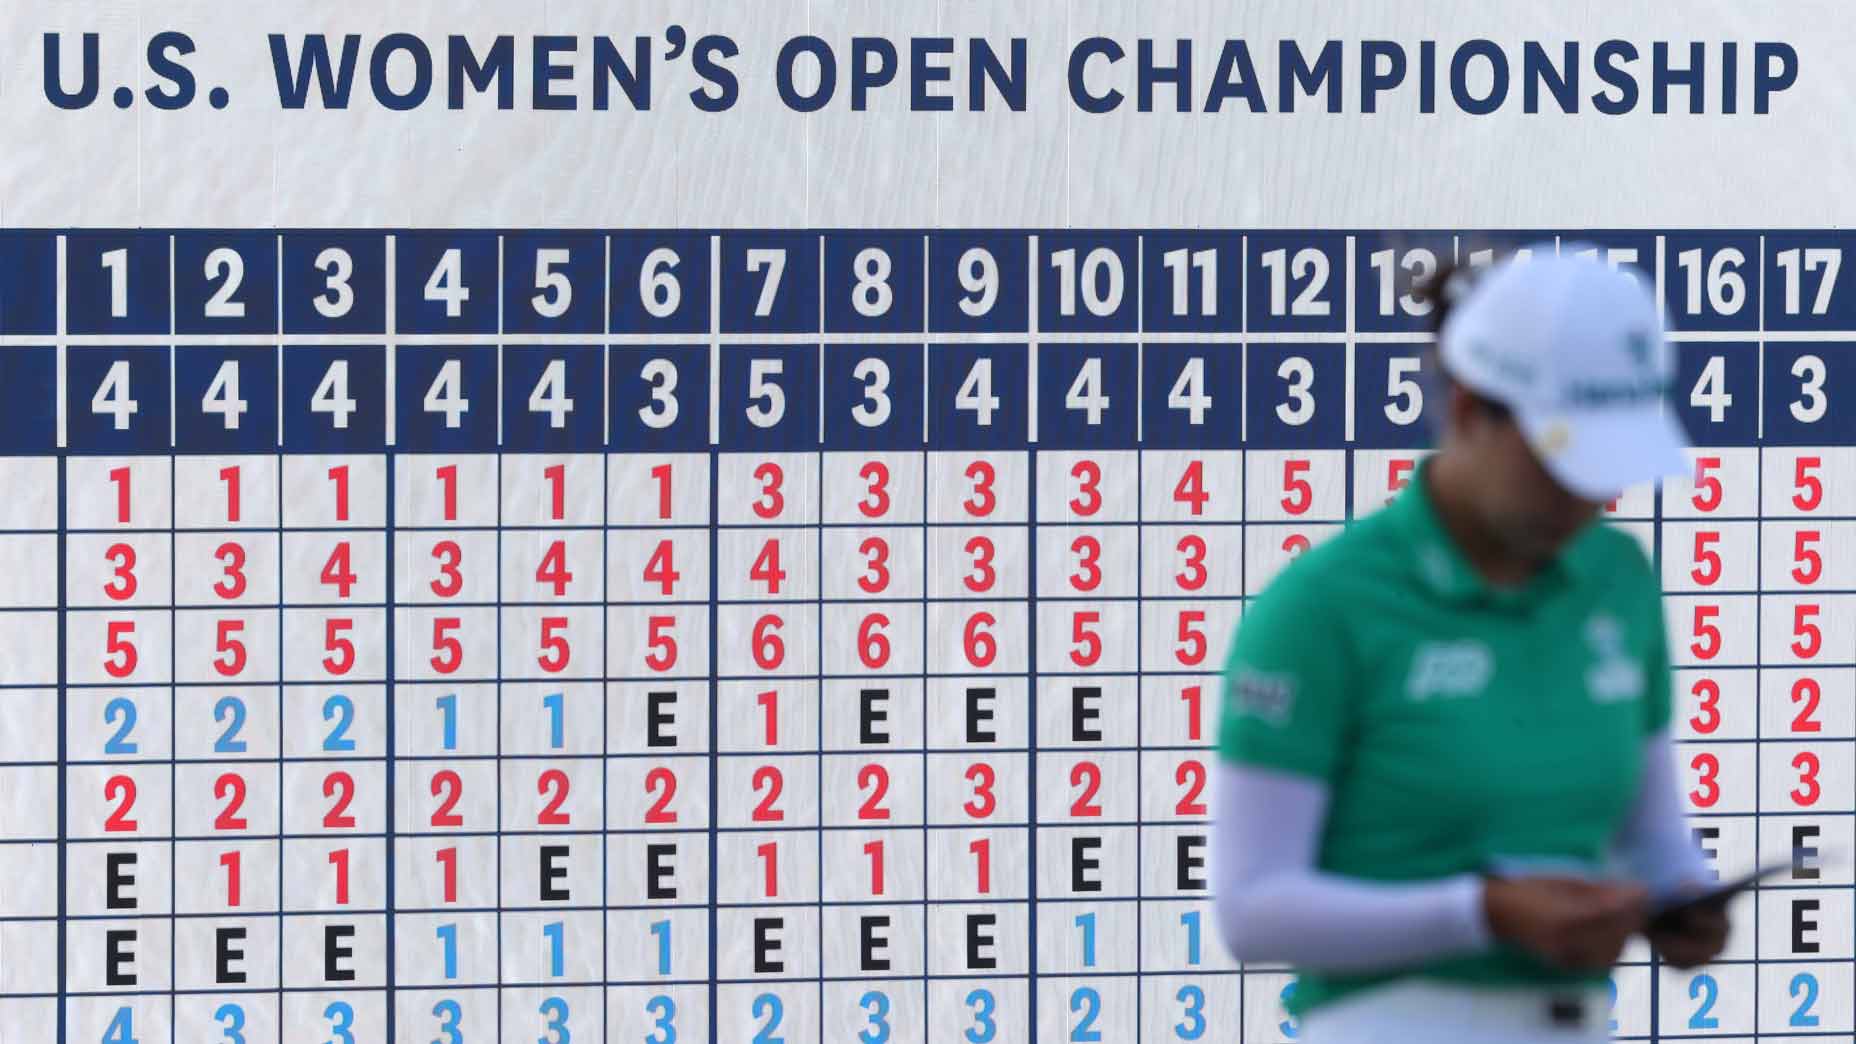 minjee lee stands in front of the leaderboard on saturday at the U.S. Women's Open